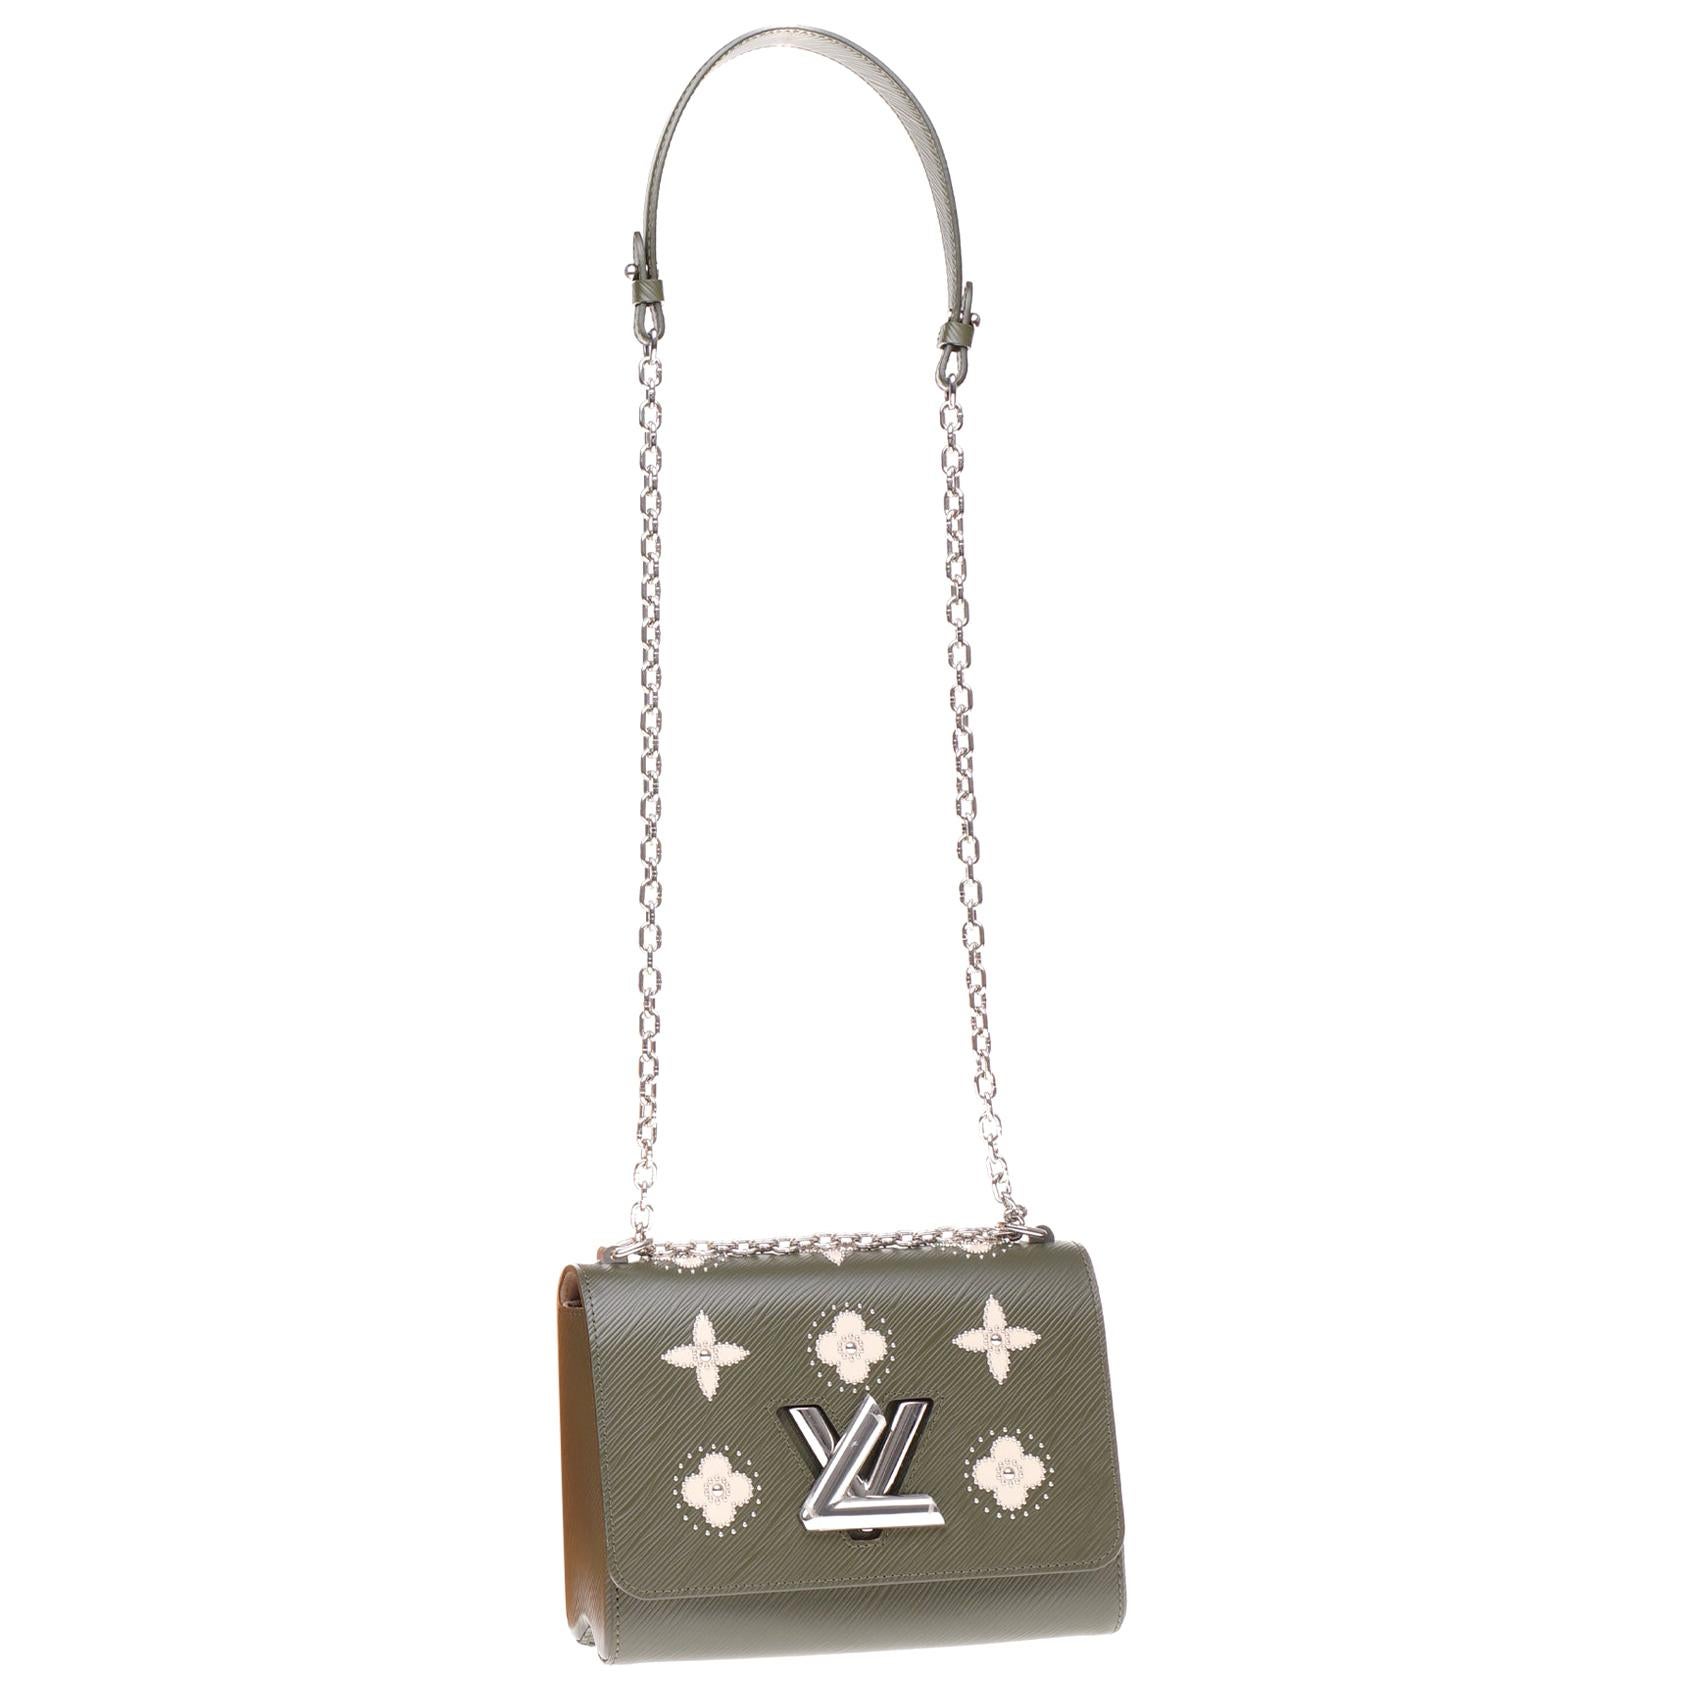 Twist chain exotic leathers handbag Louis Vuitton Pink in Exotic